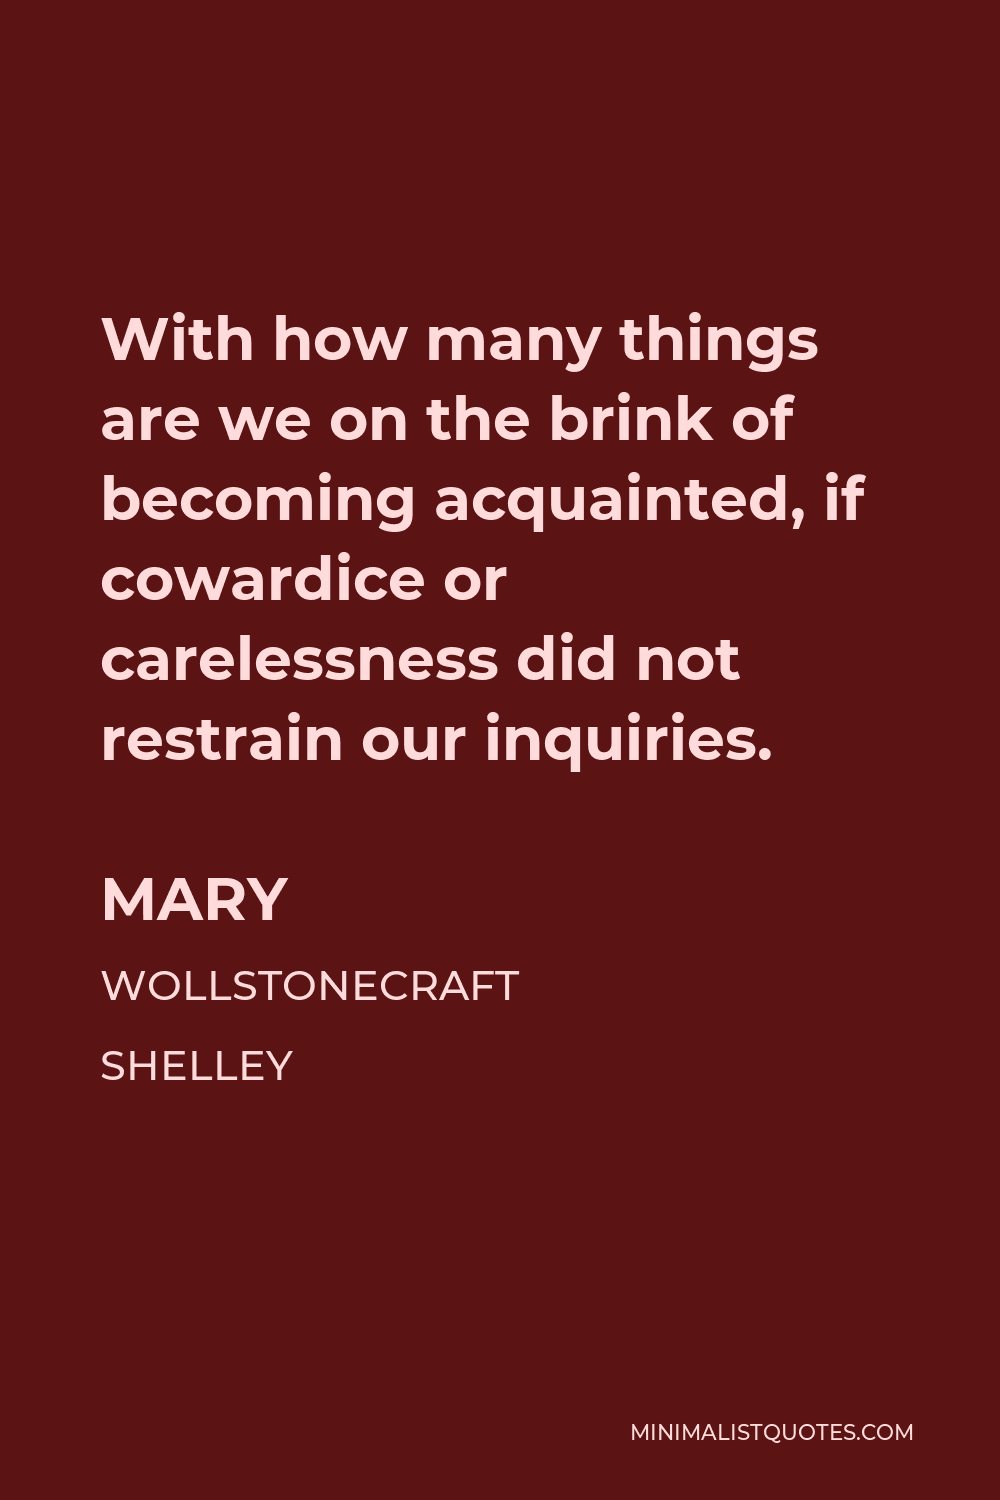 Mary Wollstonecraft Shelley Quote - With how many things are we on the brink of becoming acquainted, if cowardice or carelessness did not restrain our inquiries.